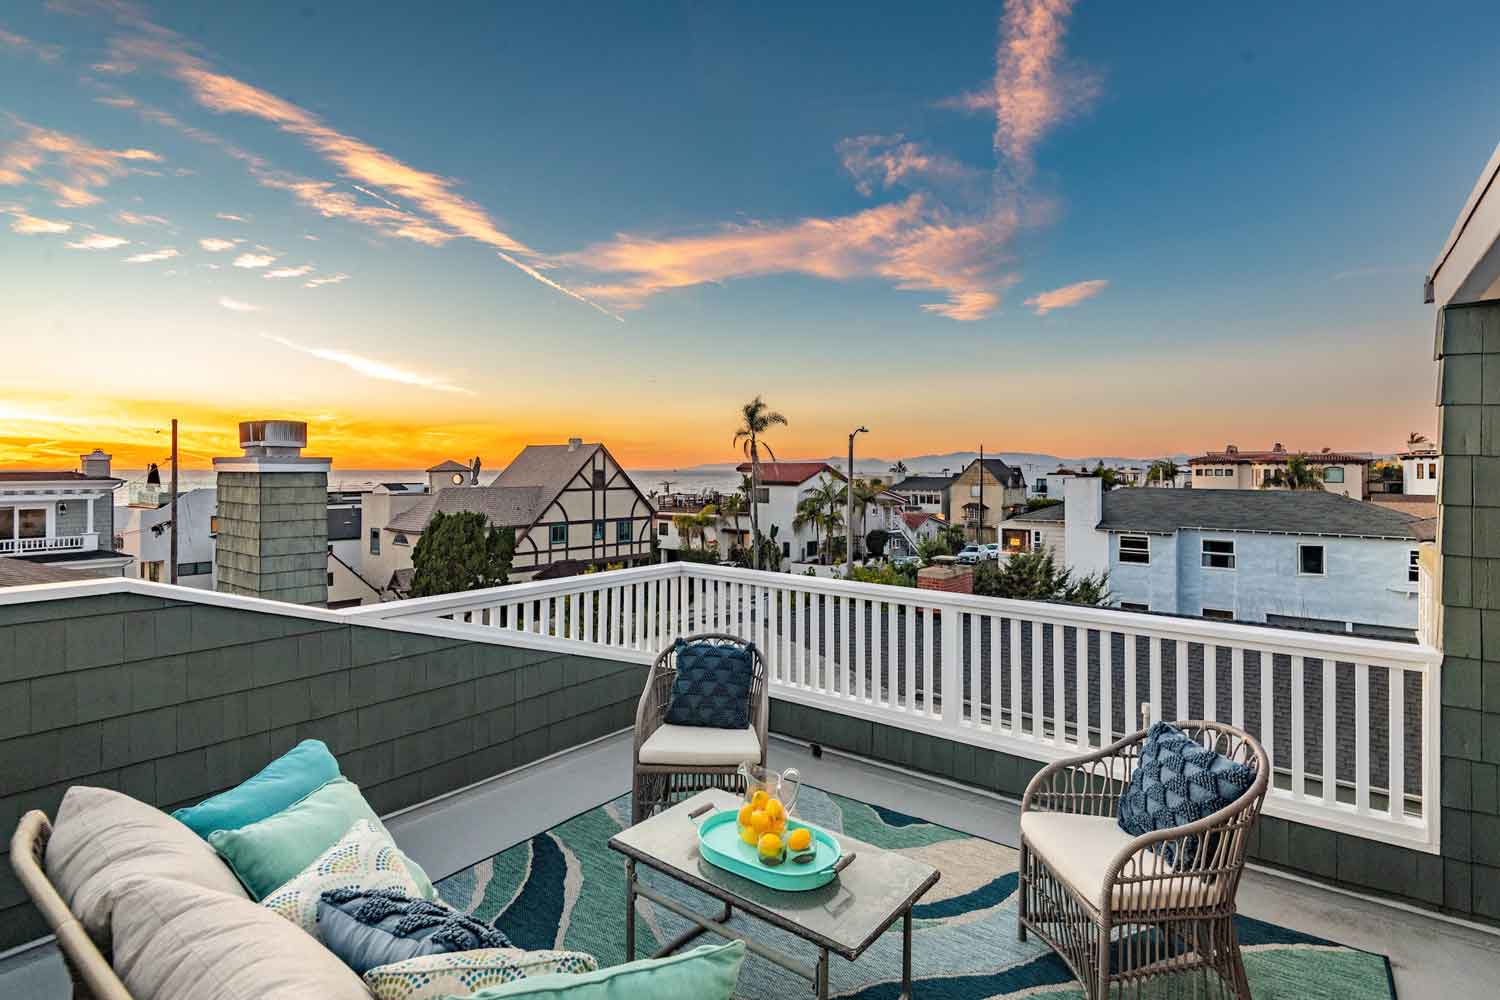 Twighlight and sunset views at 3306 Highland Ave Hermosa Beach